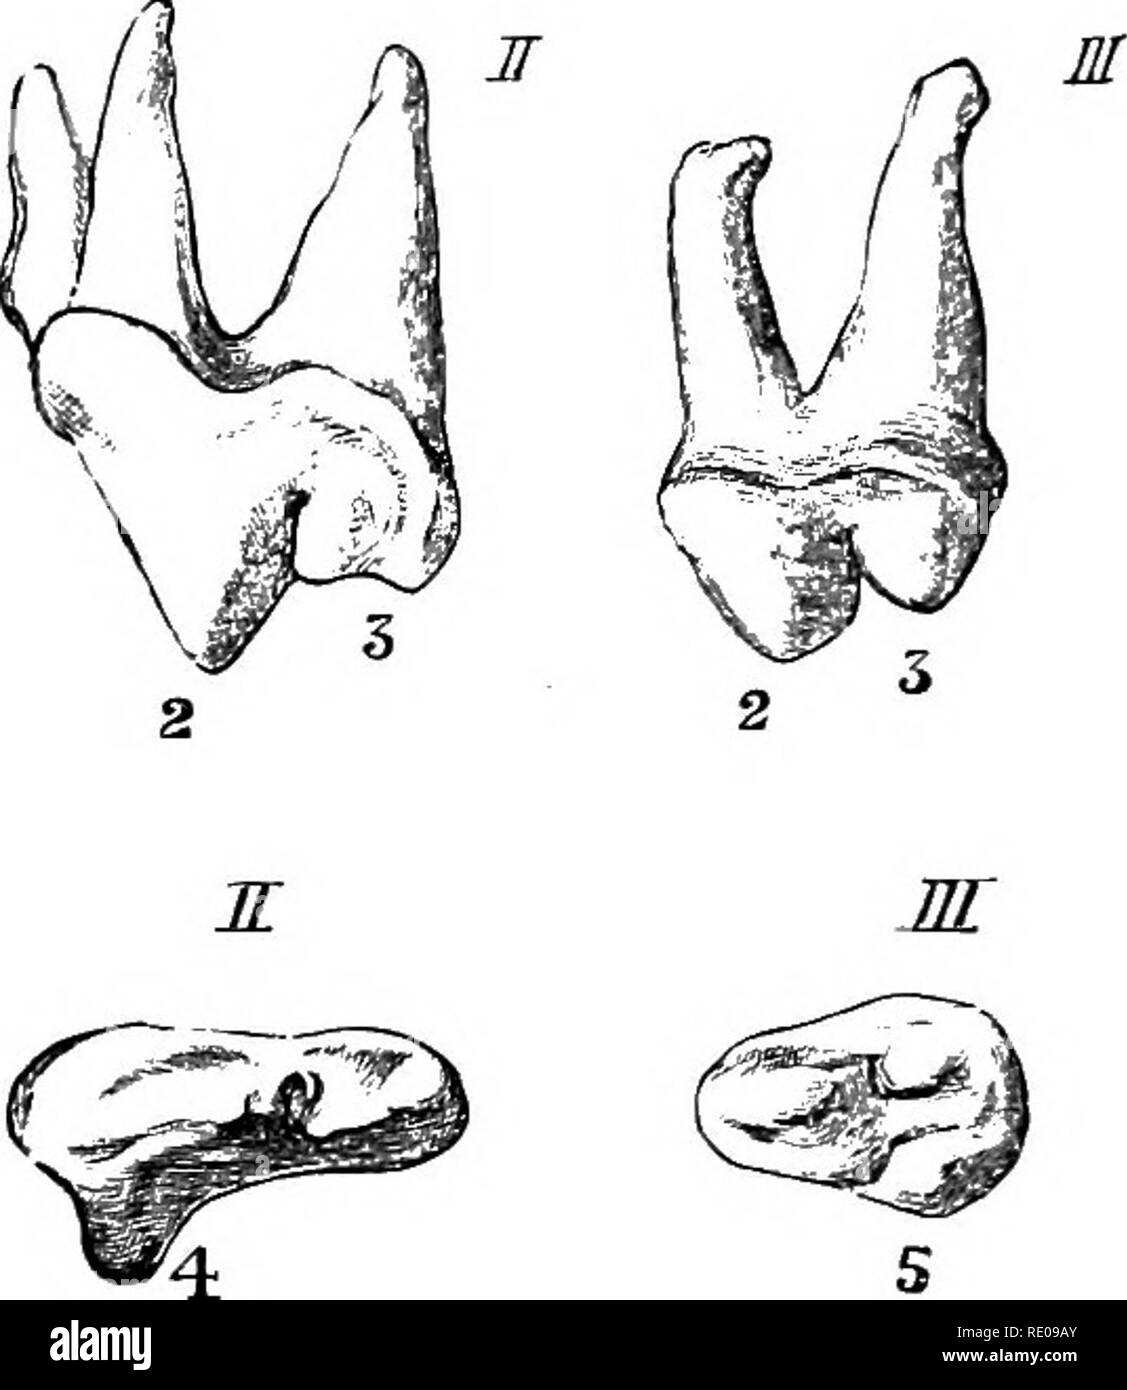 . An introduction to the study of mammals living and extinct. Mammals. Fig. 220.—Left upper carnassial teeth of Carnivora. I, Fells; II, Cayiis; III, Ursus. 1, Anterior, 2, middle (paracone), and 3, posterior (metacone) cusp of blade; 4, inner tubercle (protocone) supported on distinct root; 5, inner cusp posterior in position, and without distinct root, characteristic of the UrsidcE. in extent, but is generally placed near the anterior end of the blade, though sometimes it is median in position. In the Ursidw alone both the inner tubercle and root are wanting, and there is often a small inter Stock Photo